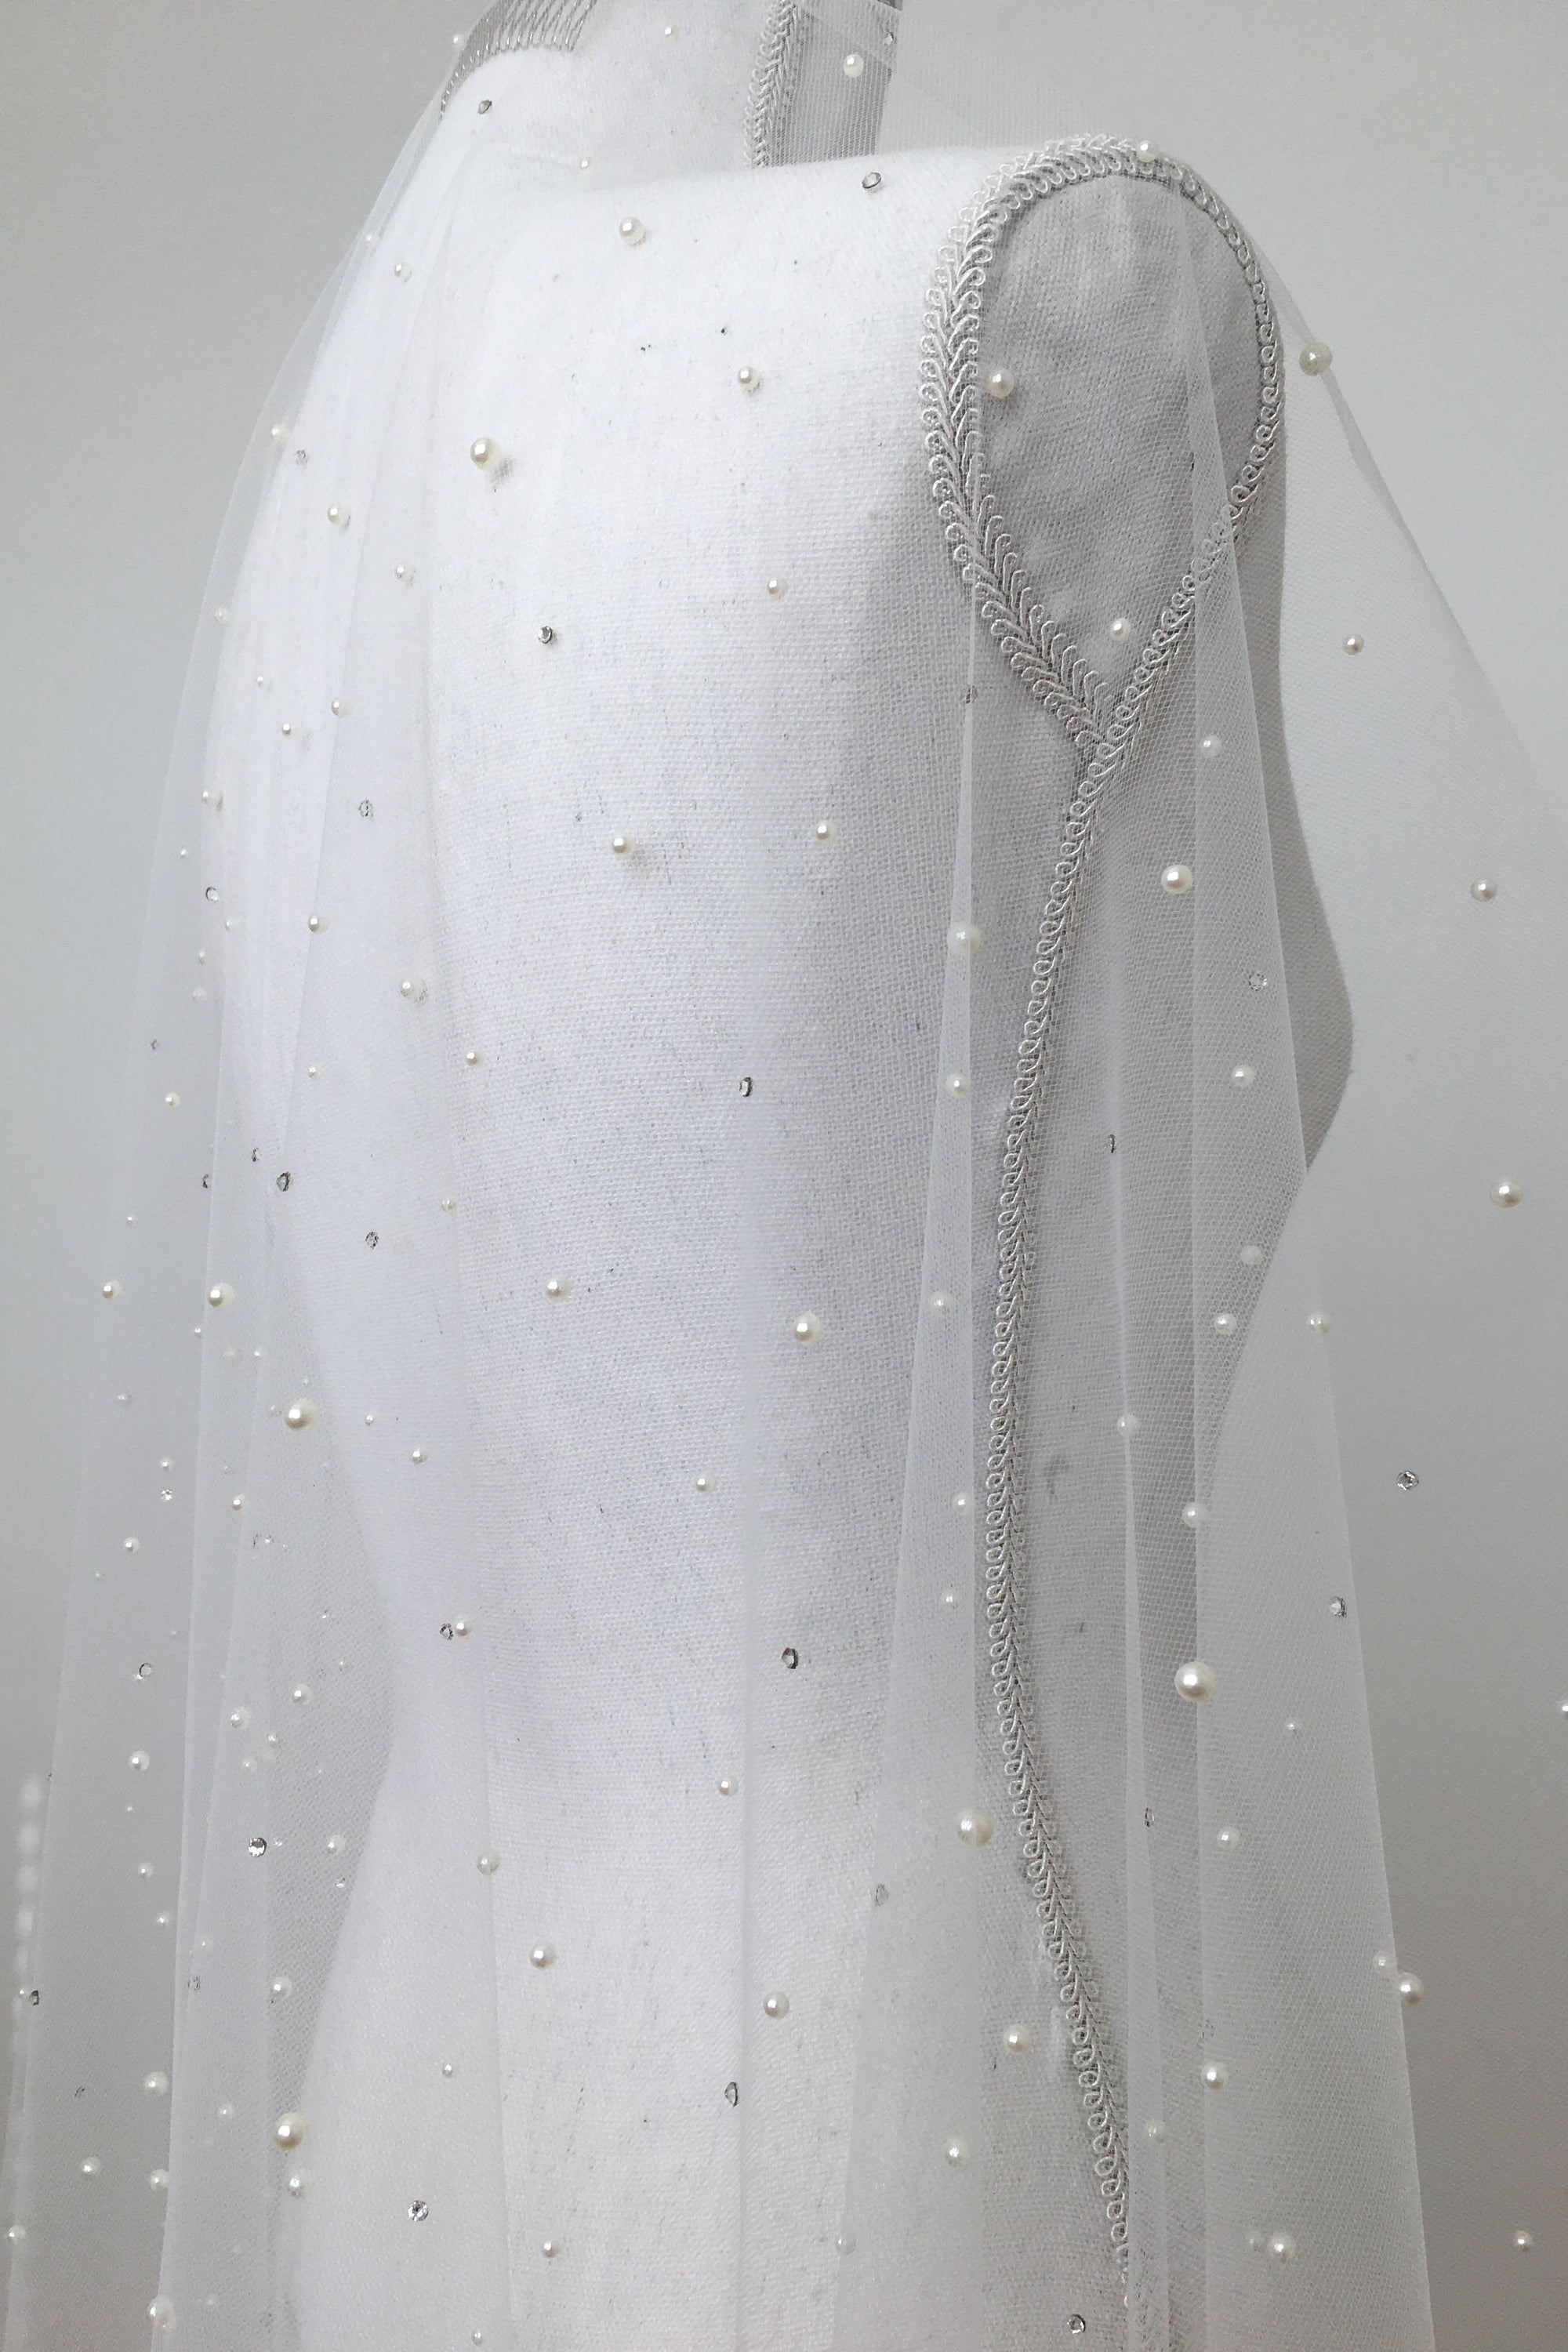 ZARA I | One Tier Veil with Pearls & Crystals